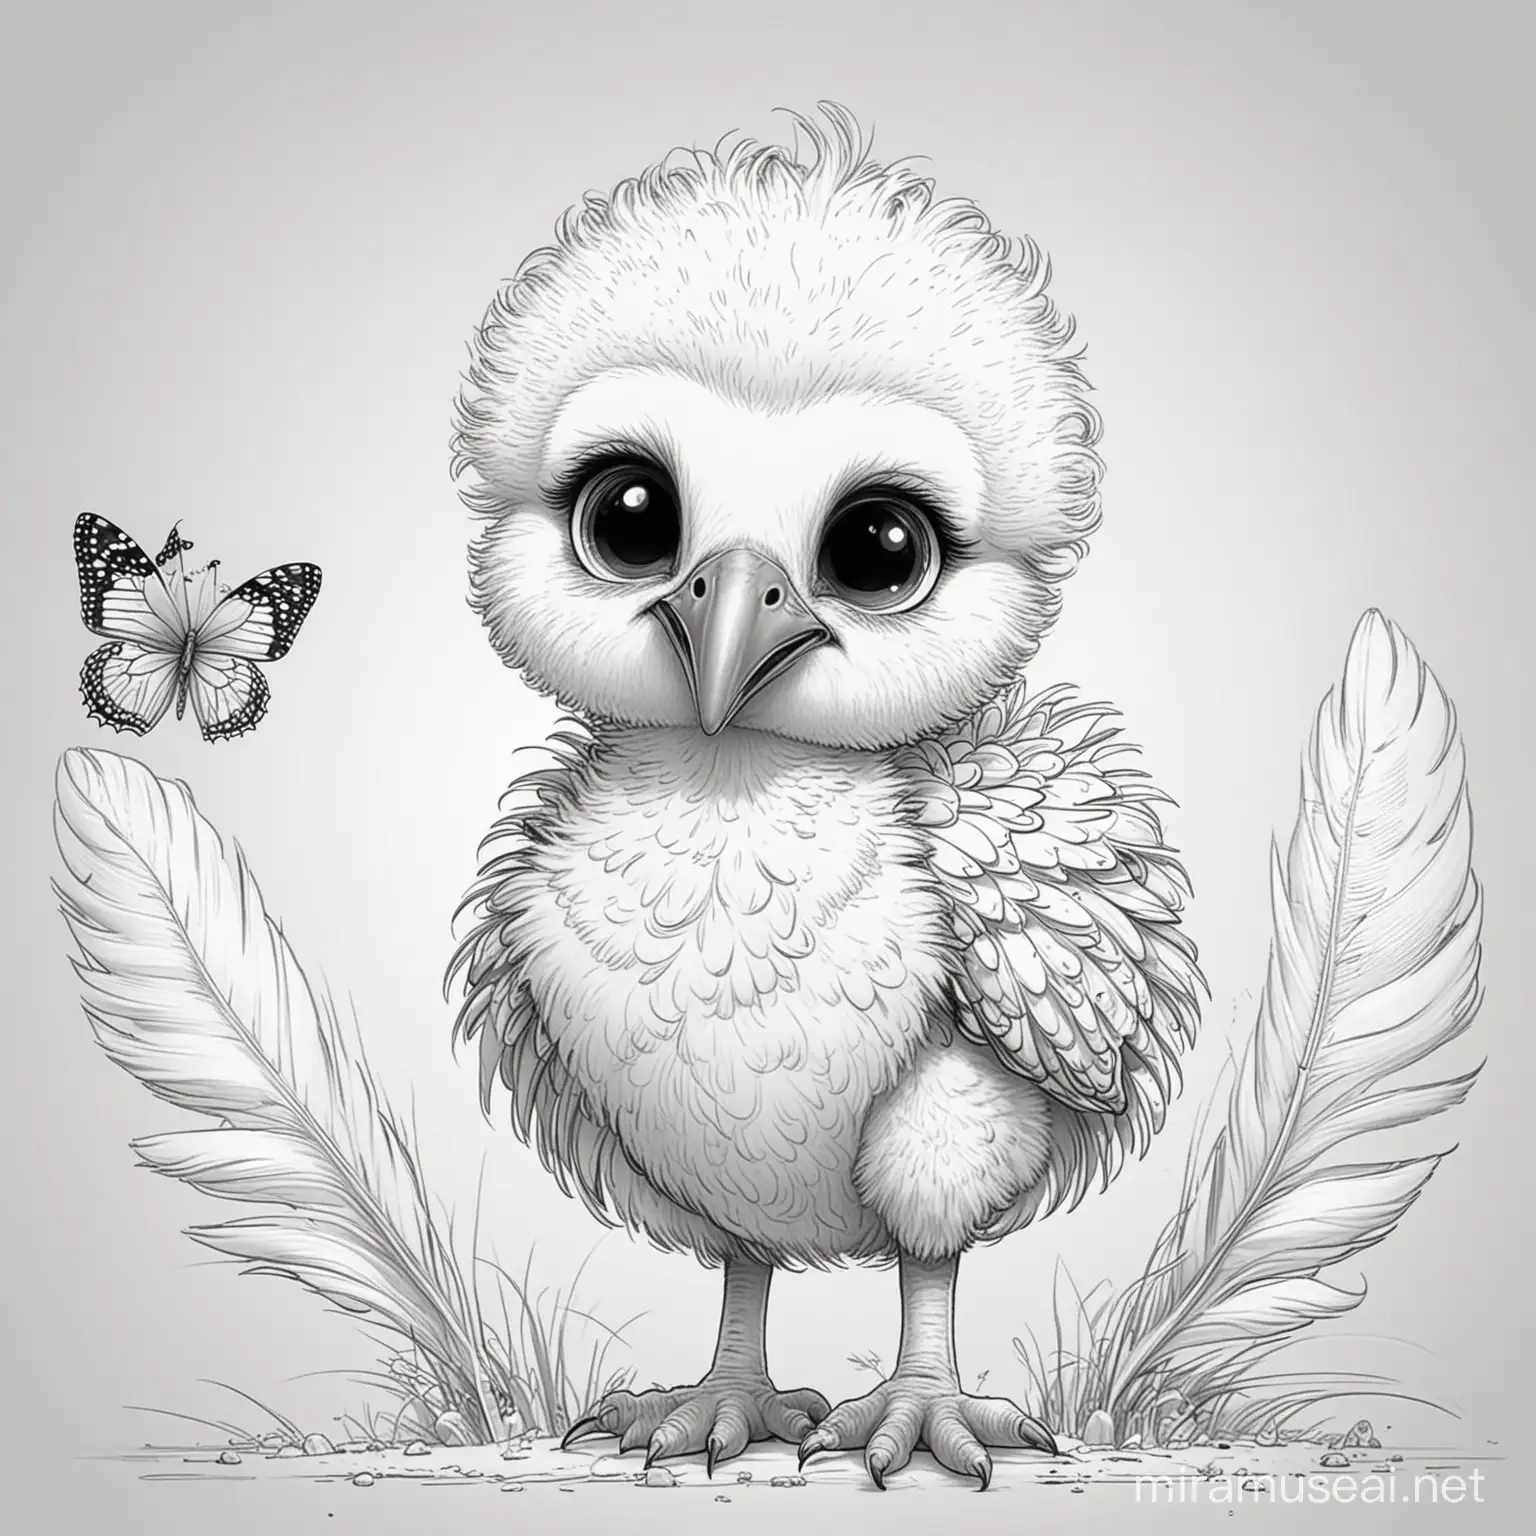 Adorable Ostrich Chick with Butterfly Delightful Cartoon Drawing